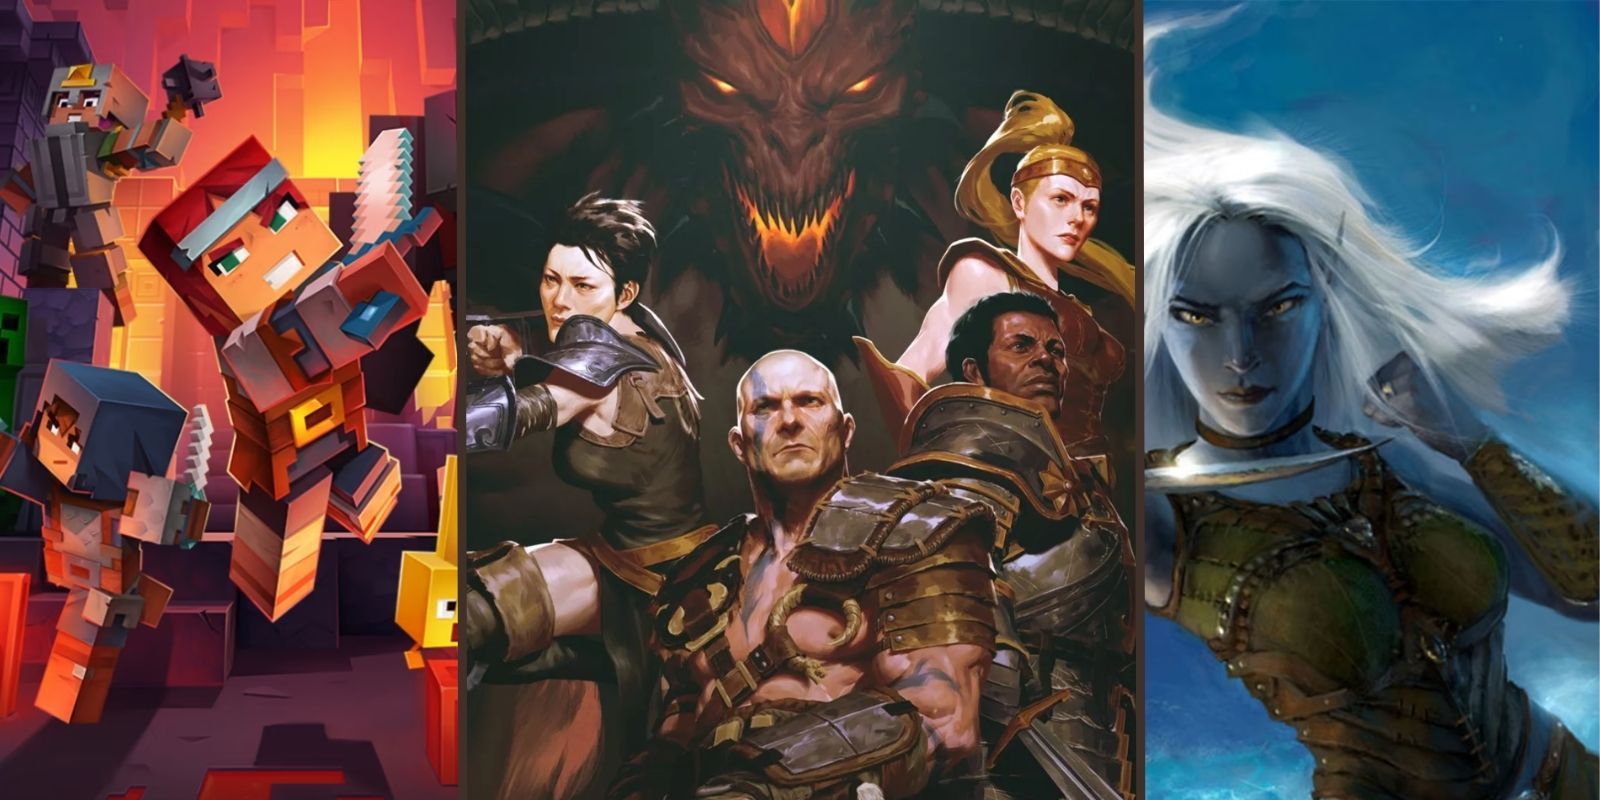 A split image showing characters and a demon from Diablo 4 largest in the center; on either side are characters from Minecraft Dungeons and Baldur's Gate: Dark Alliance 2.